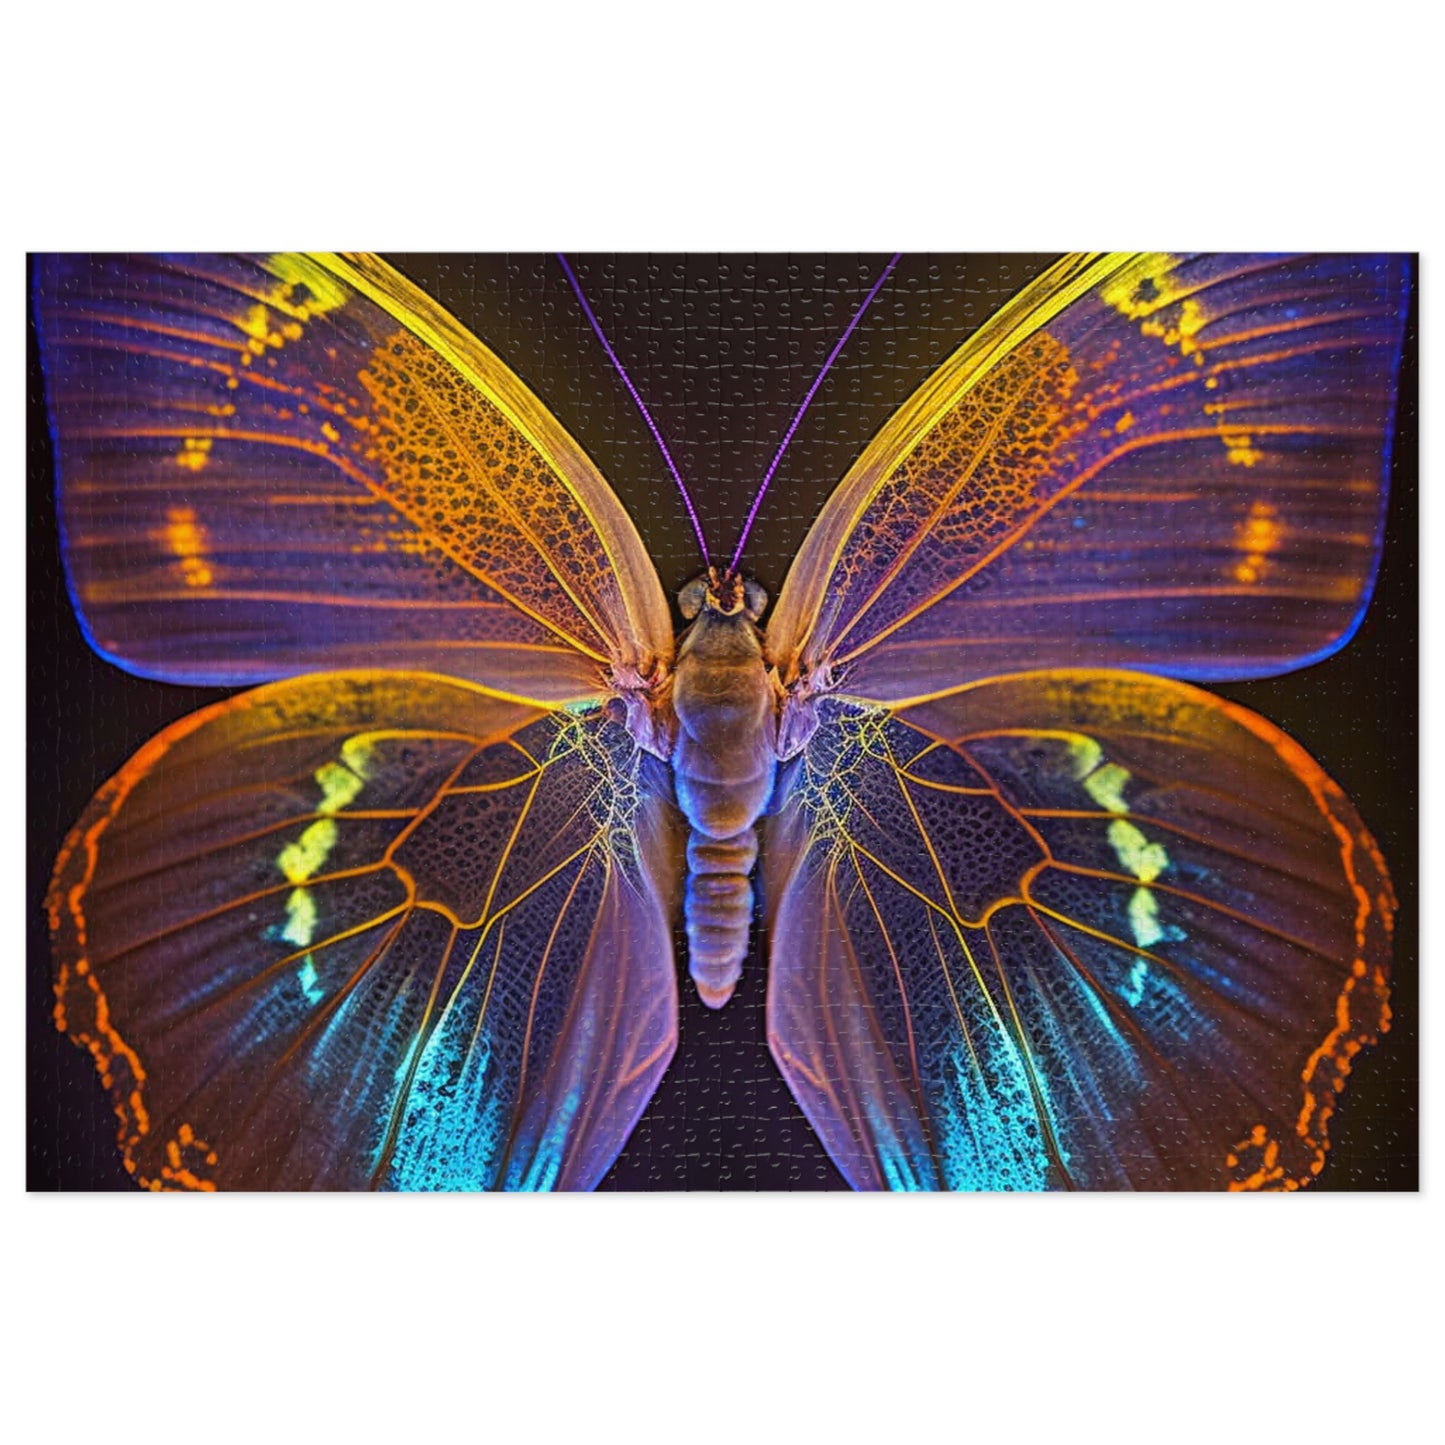 Jigsaw Puzzle (30, 110, 252, 500,1000-Piece) Neon Butterfly Flair 2